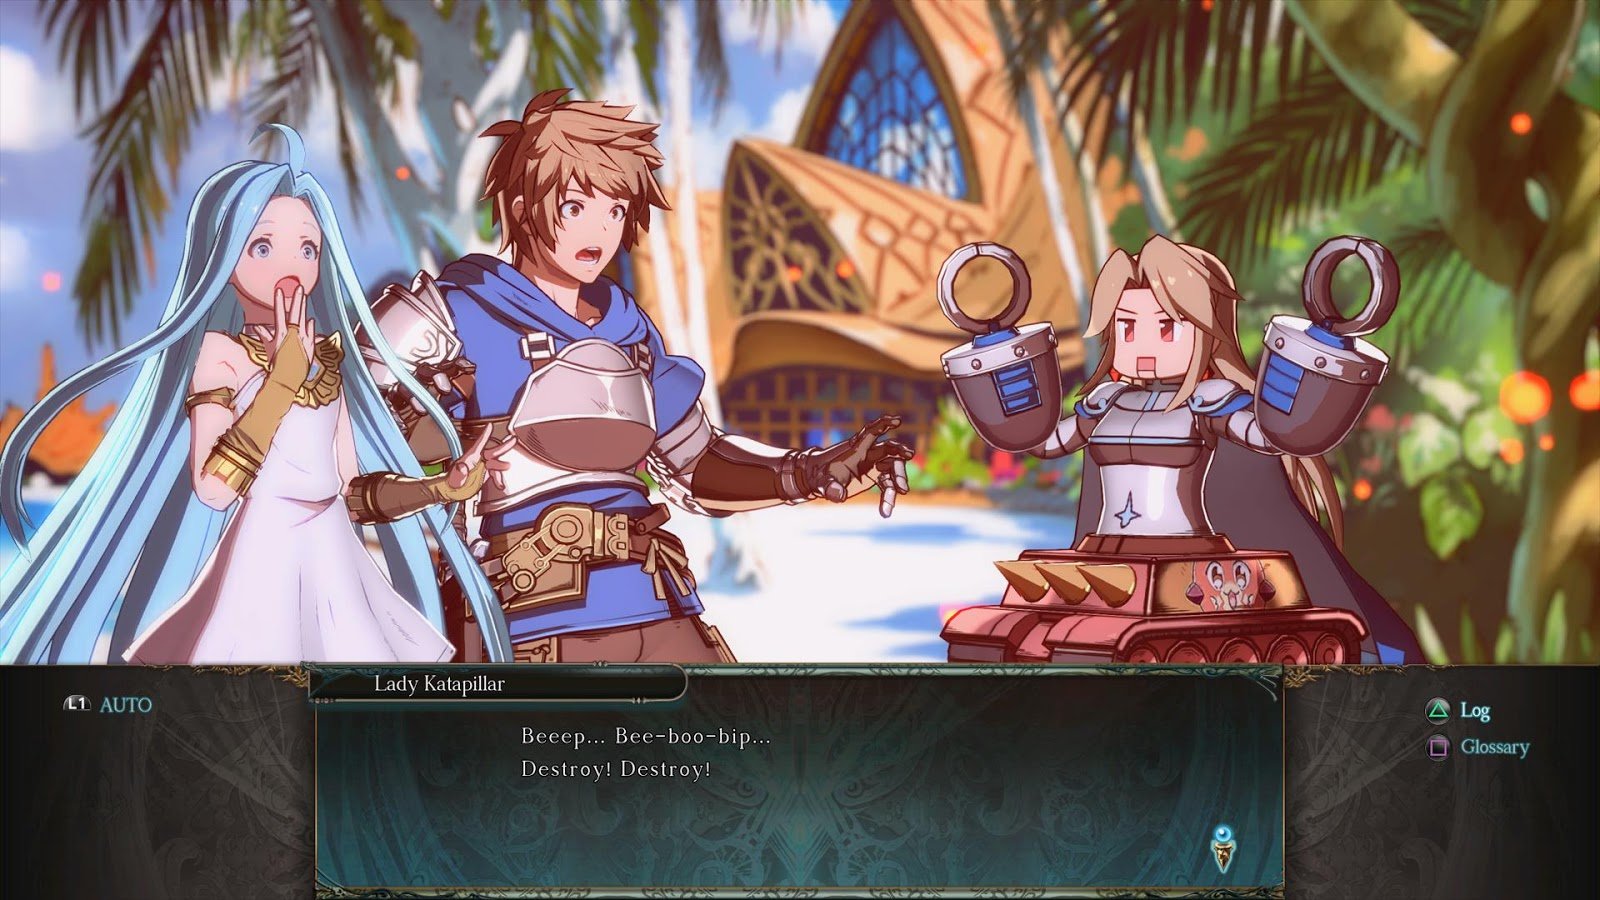 Anime and action come to life in Granblue Fantasy: Versus